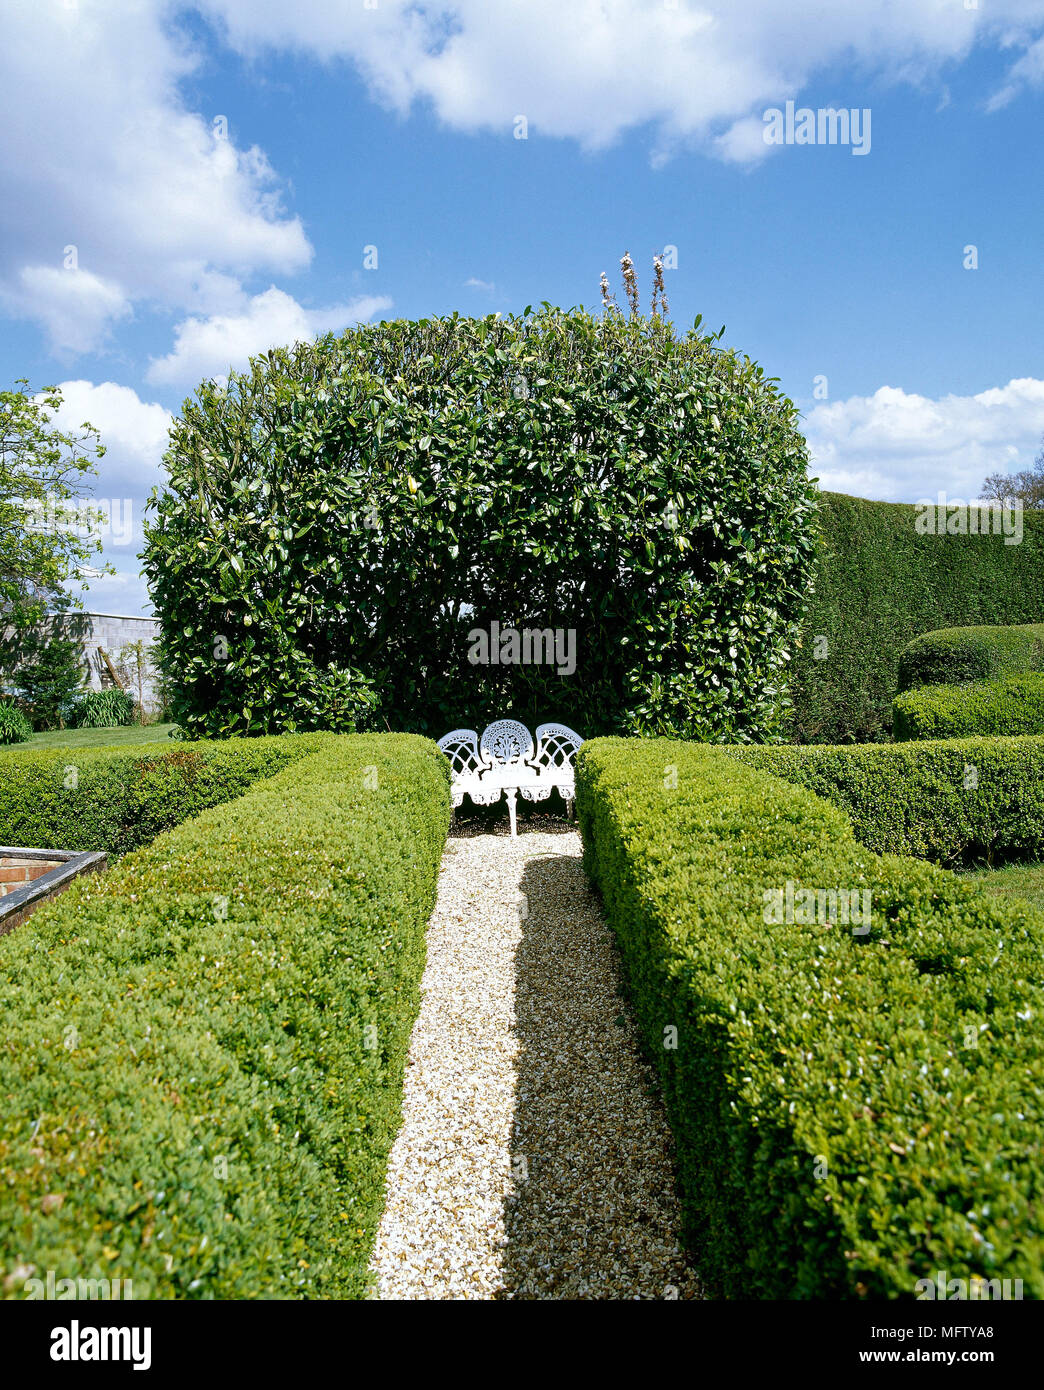 A country garden with gravel path, clipped hedging, white metal seat, Stock Photo